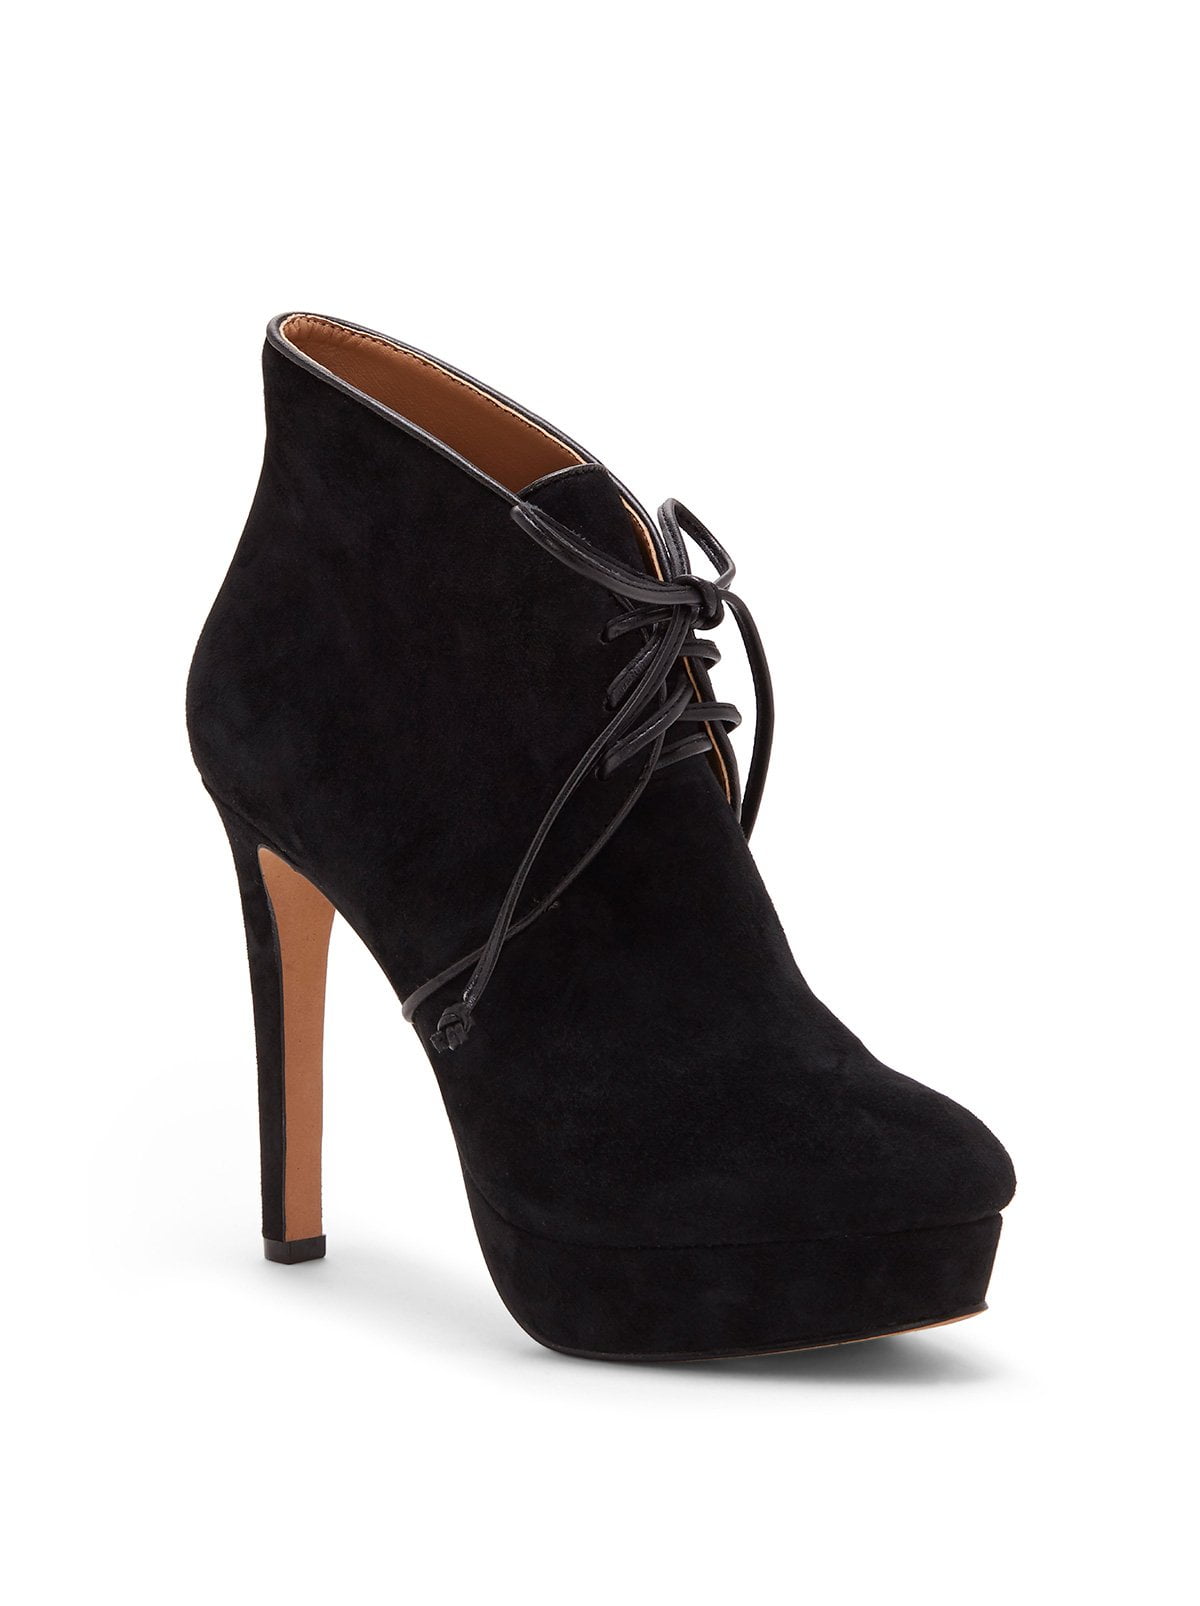 jessica simpson lace booties